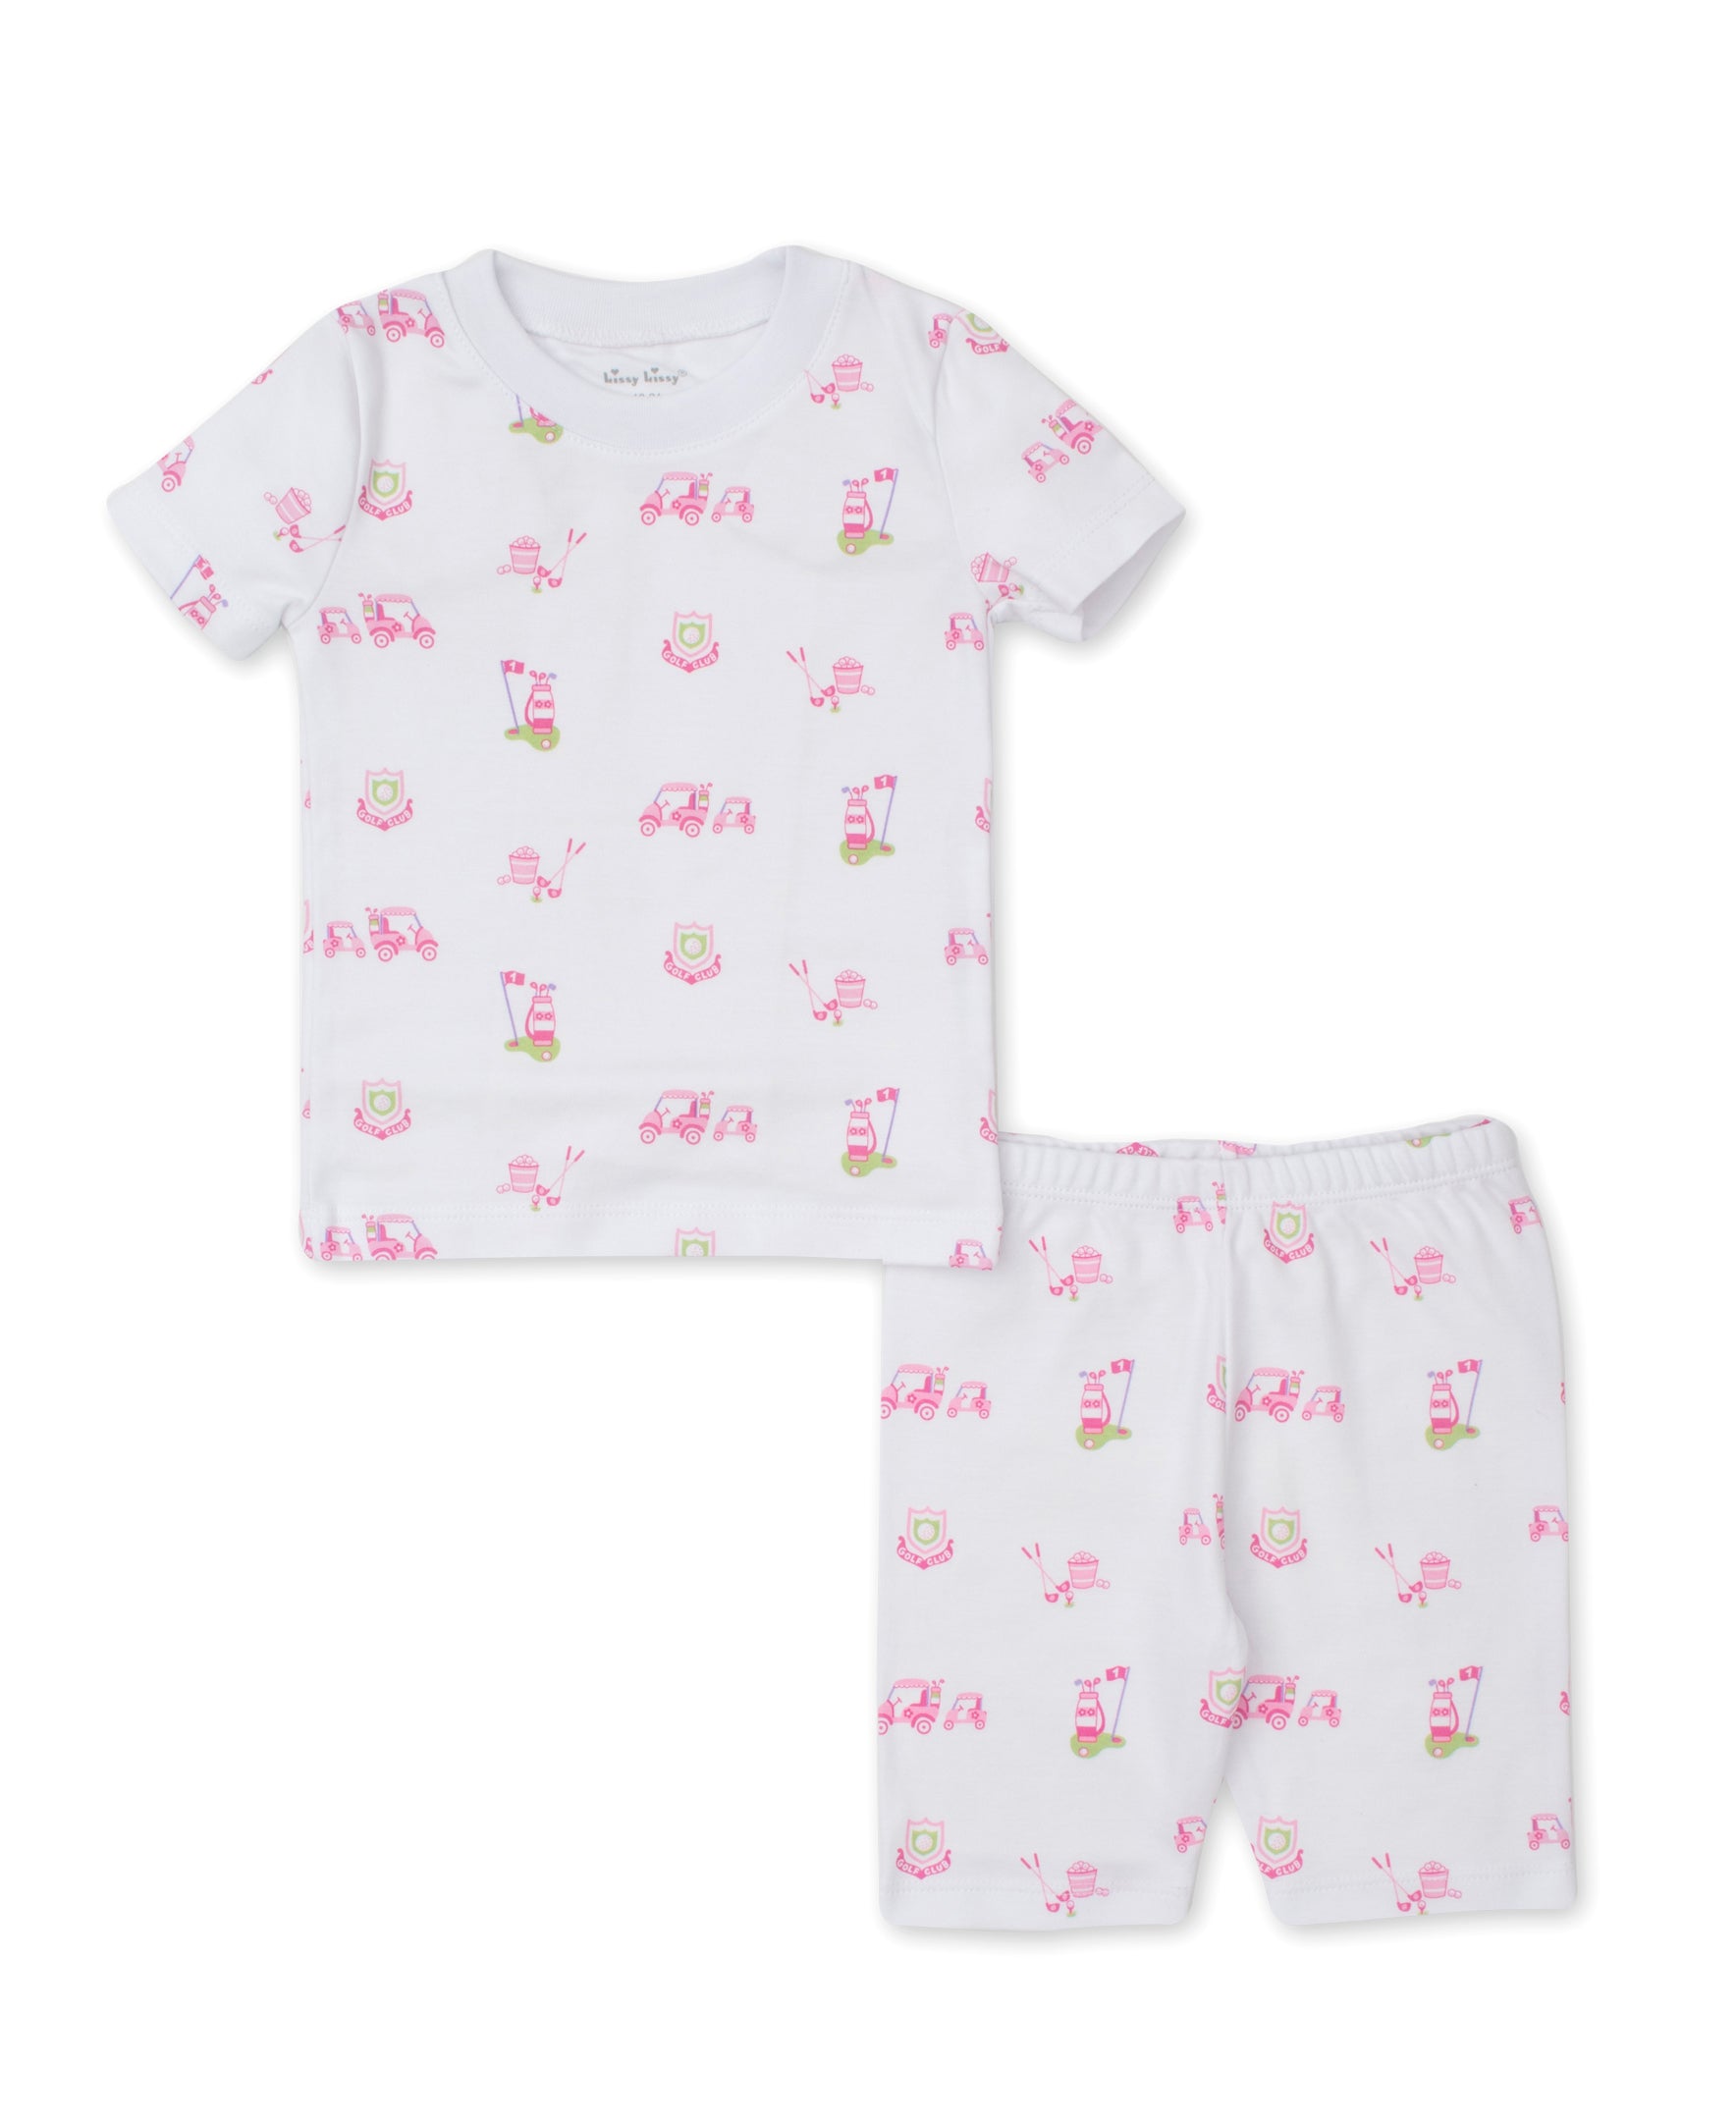 Hole In One Pink Toddler Short Pajama Set - Kissy Kissy